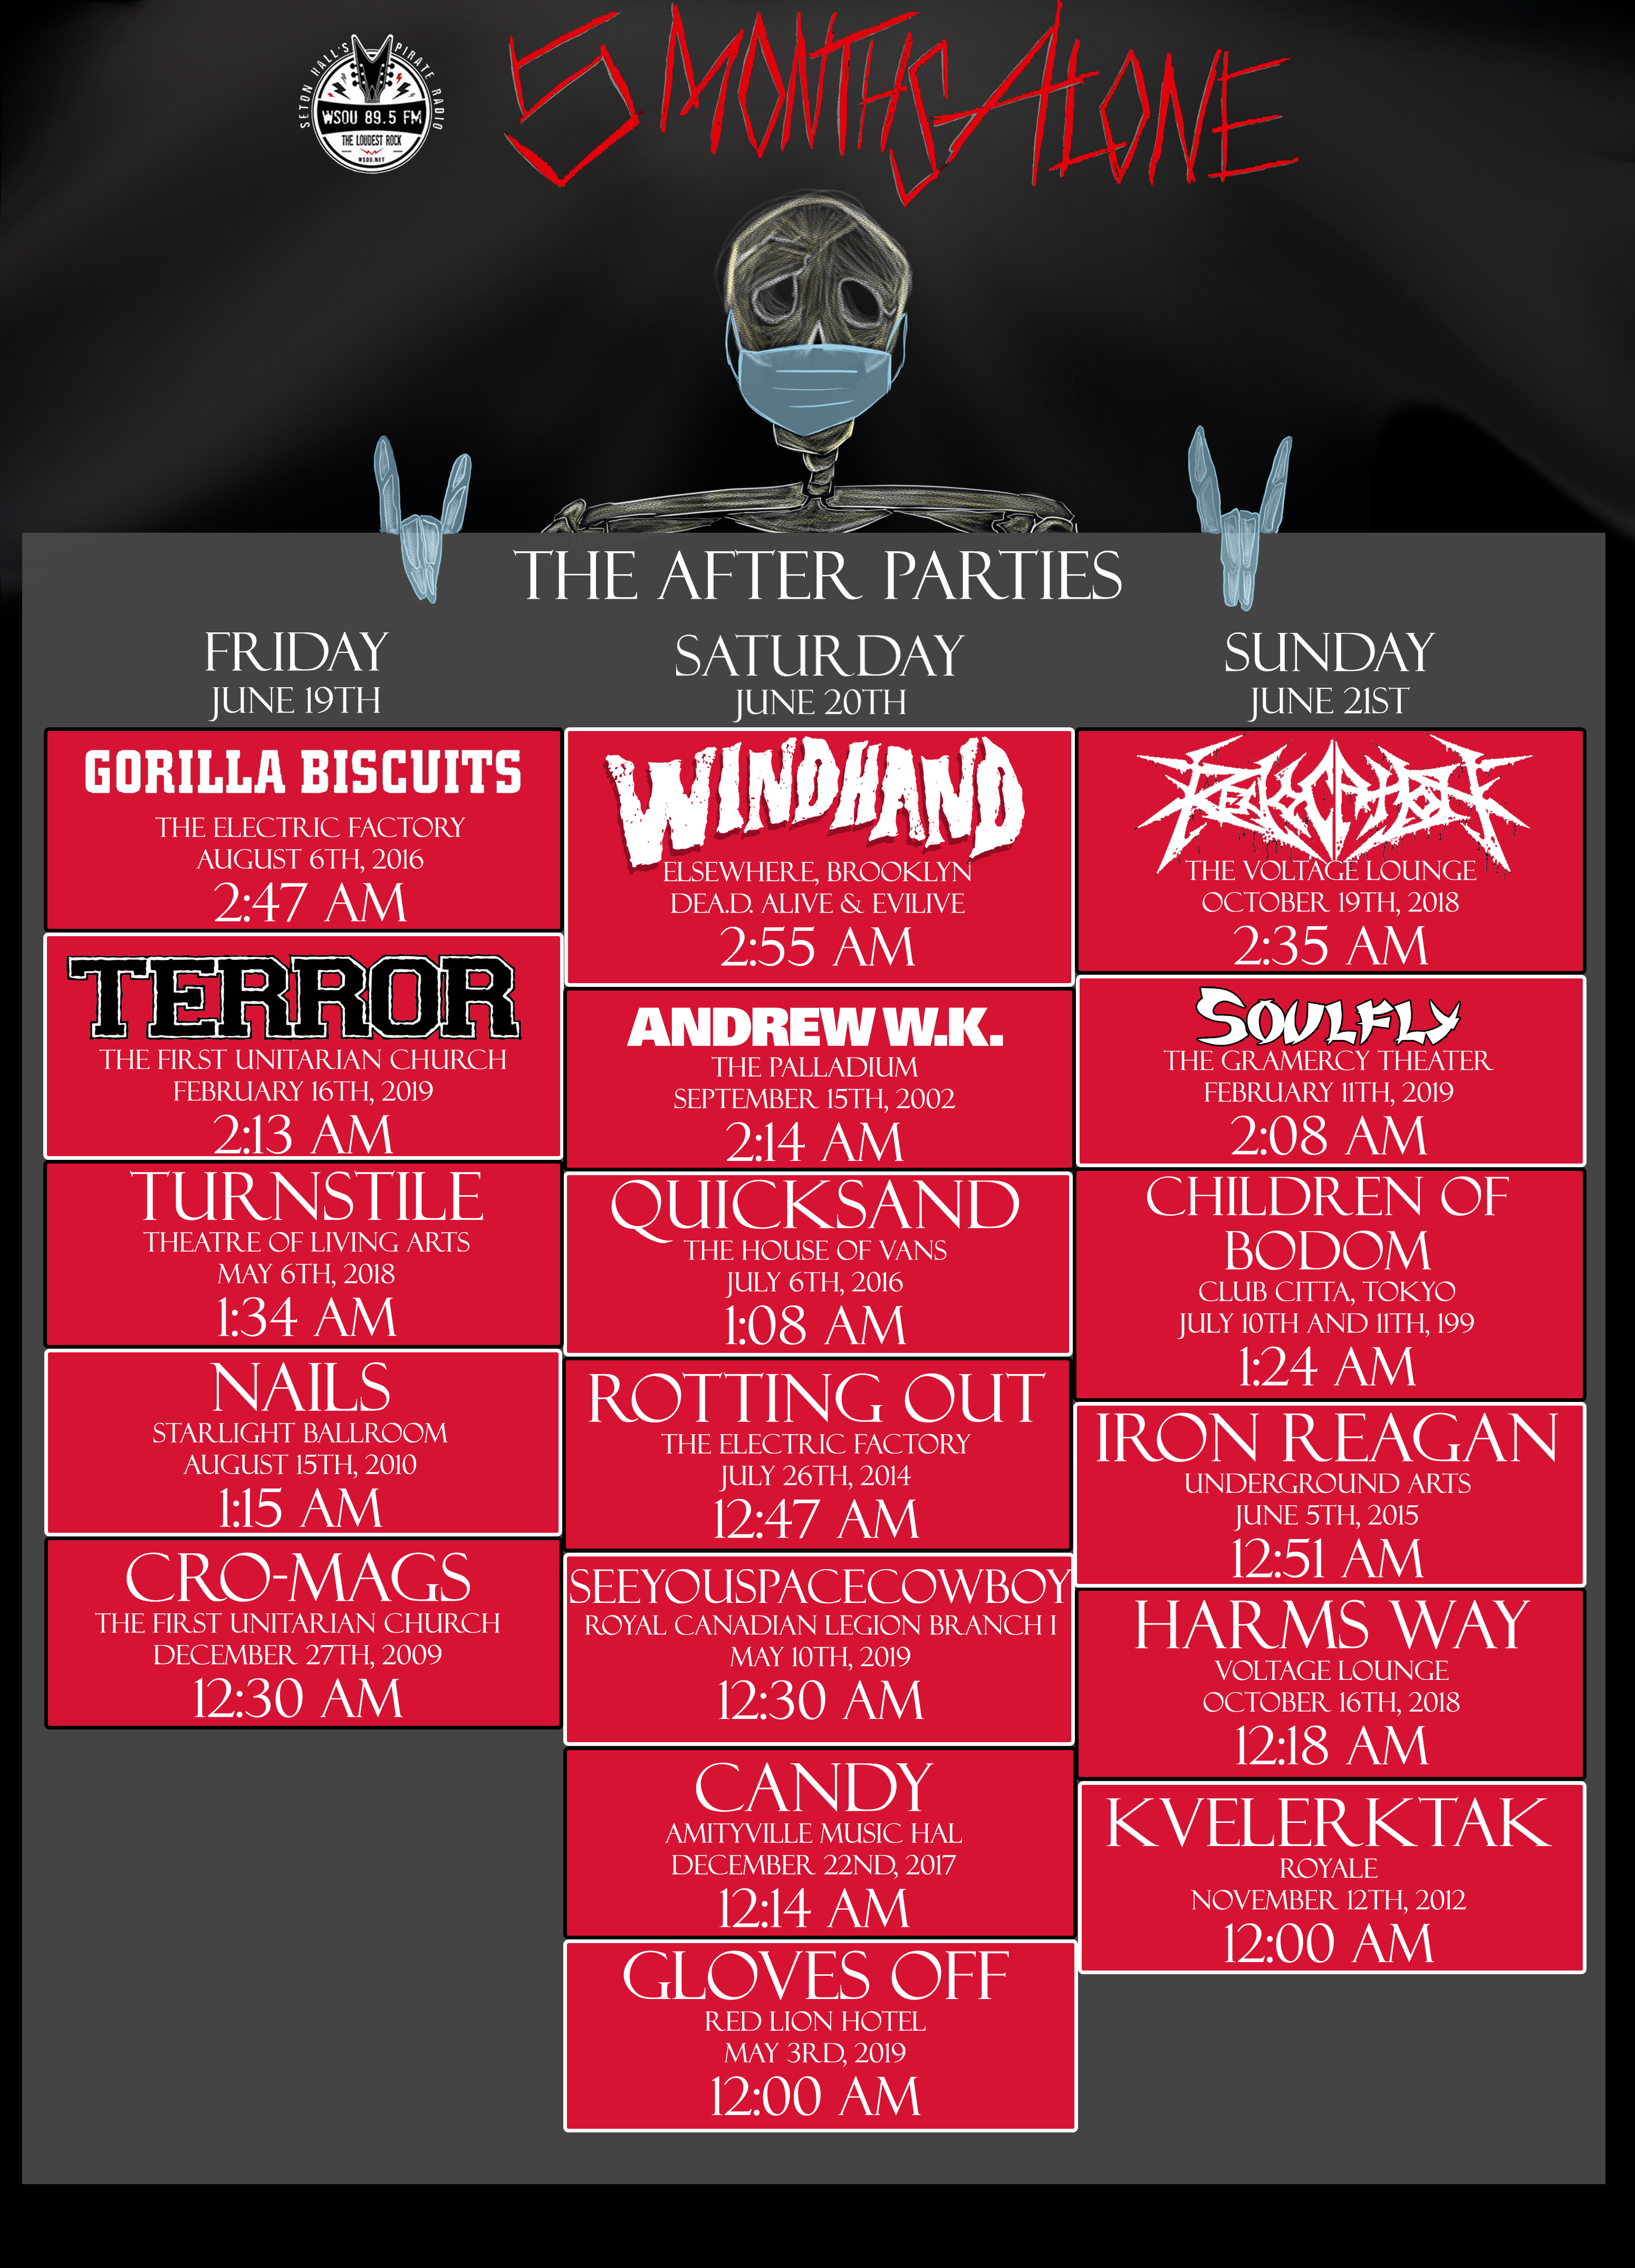 THE AFTERPARTIES FRIDAY JUNE 19TH GORILLA BISCUITS 2:47 AM TERROR 2:13 AM TURNSTILE 1:34 AM NAILS 1:15 AM CRO-MAGS 12:30 AM SATURDAY JUNE 20TH WINDHAND 2:55 AM ANDREW W.K. 2:14 AM QUICKSAND 1:08 AM ROTTING OUT 12:47 AM SEEYOUSPACECOWBOY 12:30 AM AND MORE!